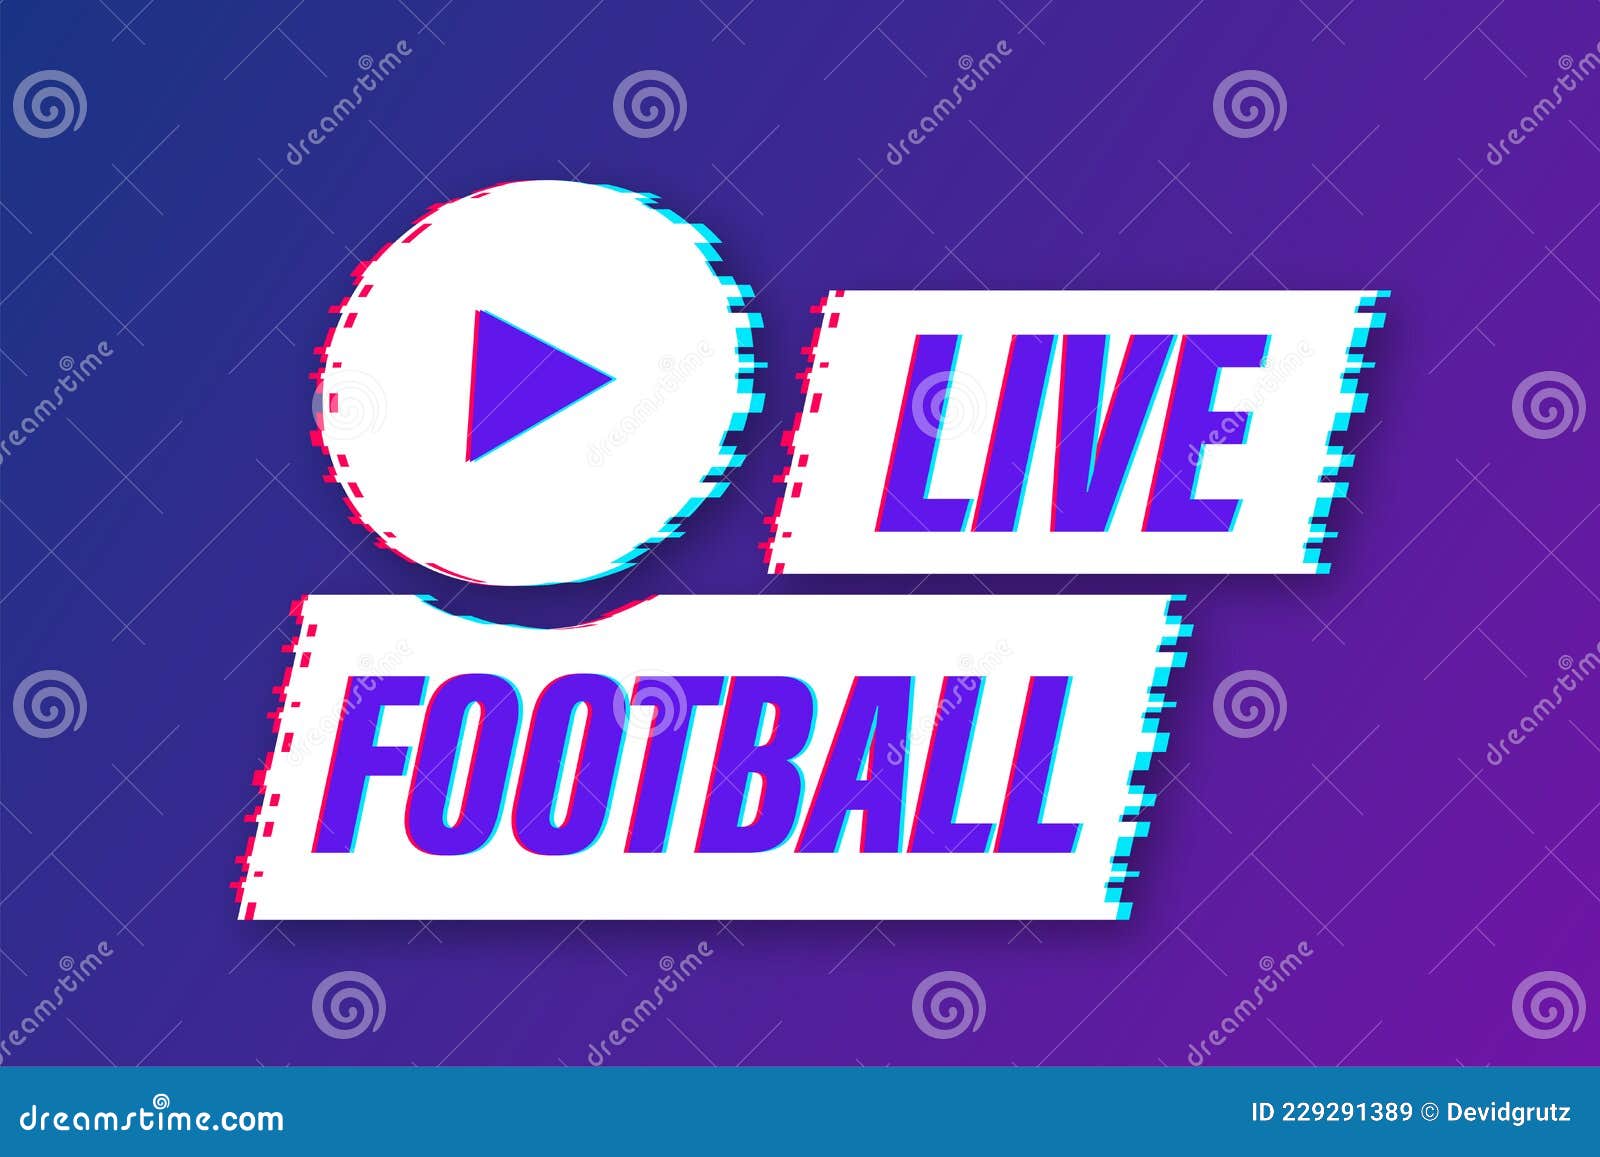 Live Football Streaming Glitch Icon, Button for Broadcasting or Online Football Stream